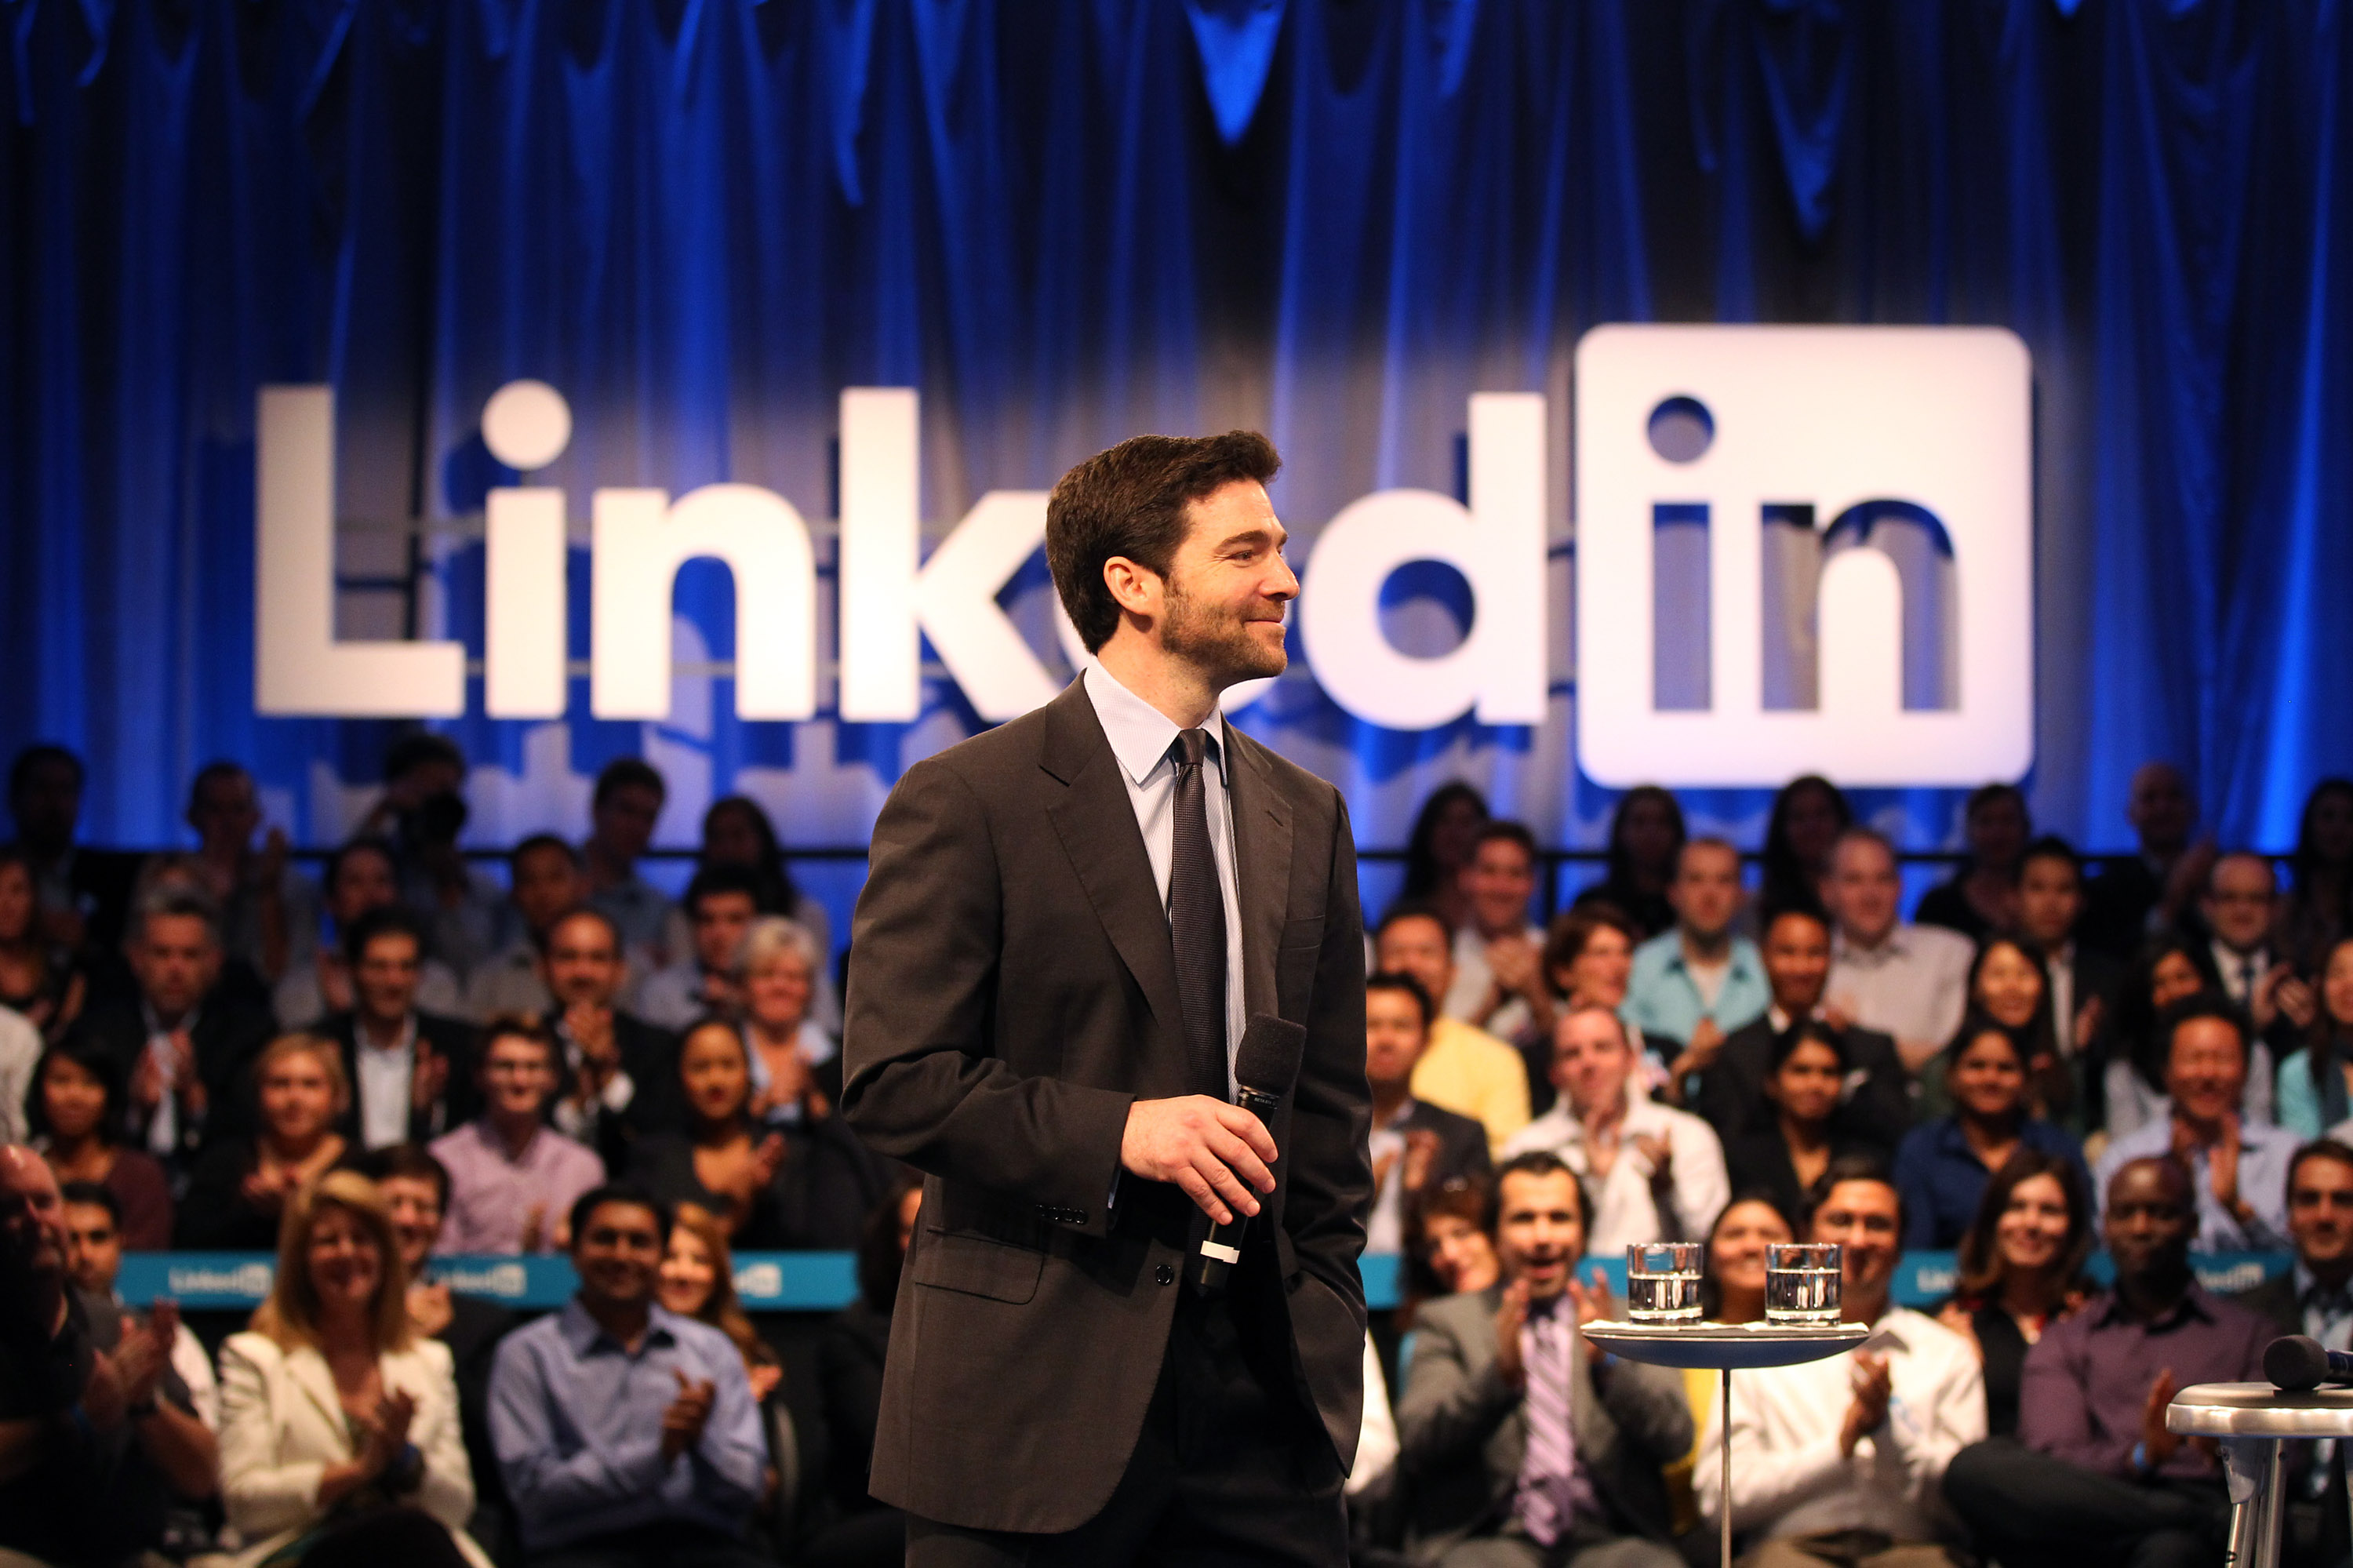 Linkedin CEO Jeff Weiner will be staying on to lead the company under Microsoft's control. (Stephen Lam&mdash;Getty Images)